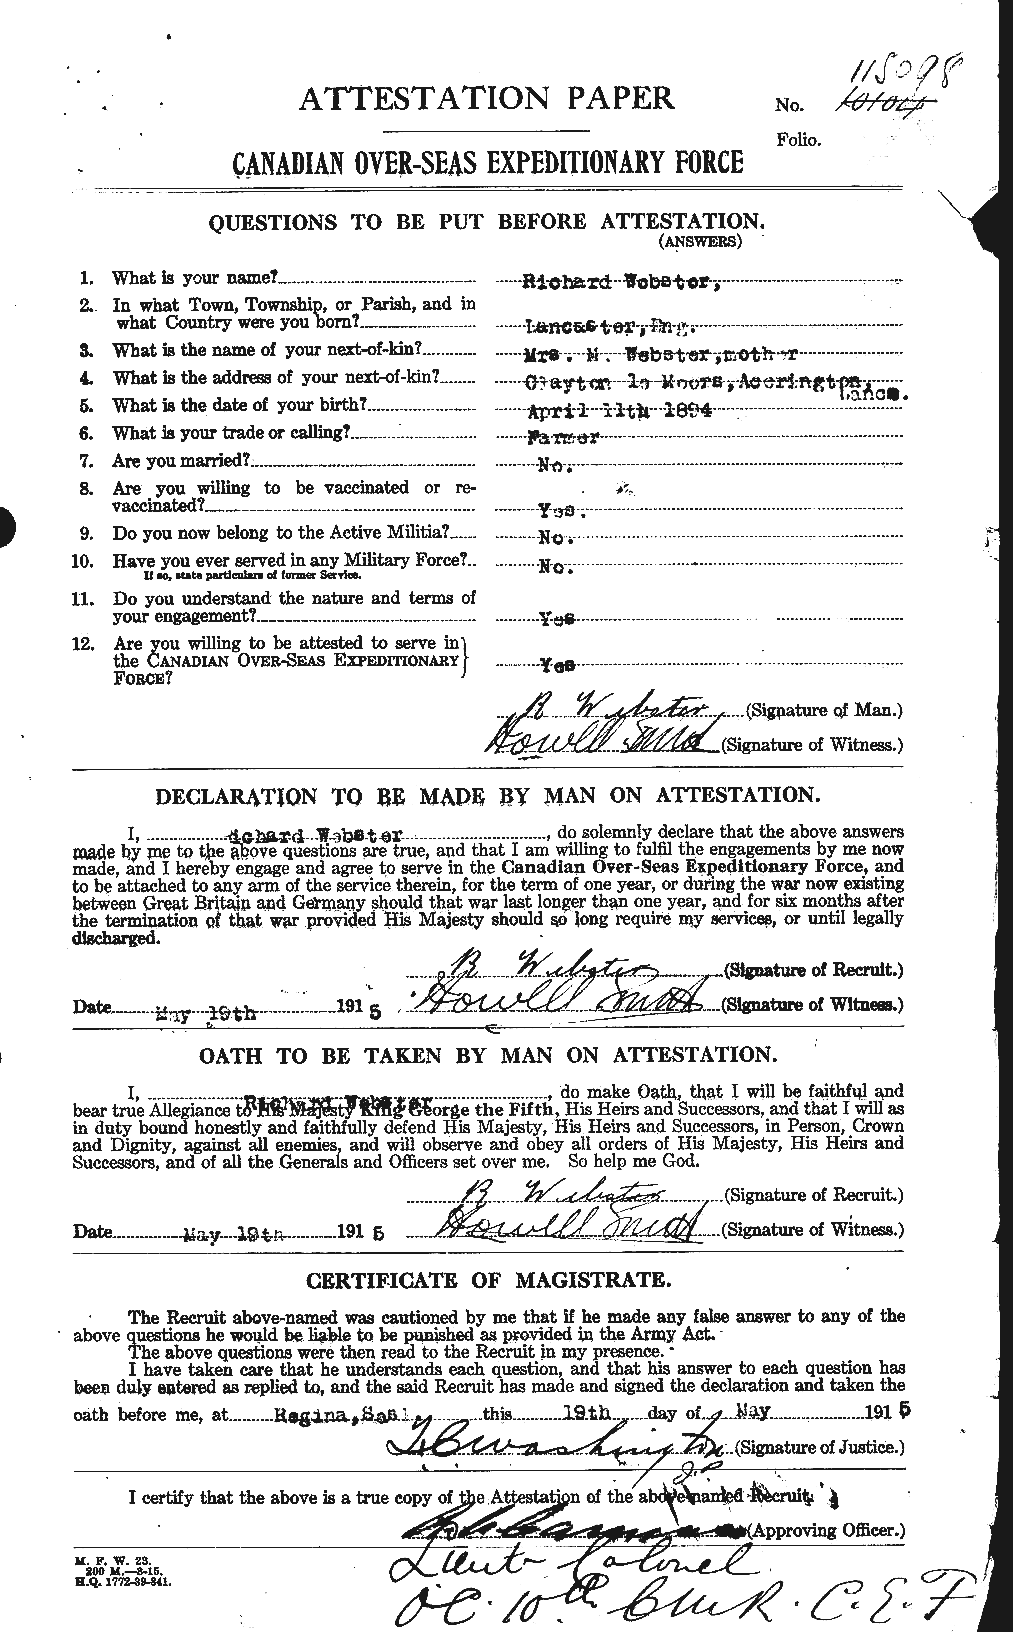 Personnel Records of the First World War - CEF 670540a